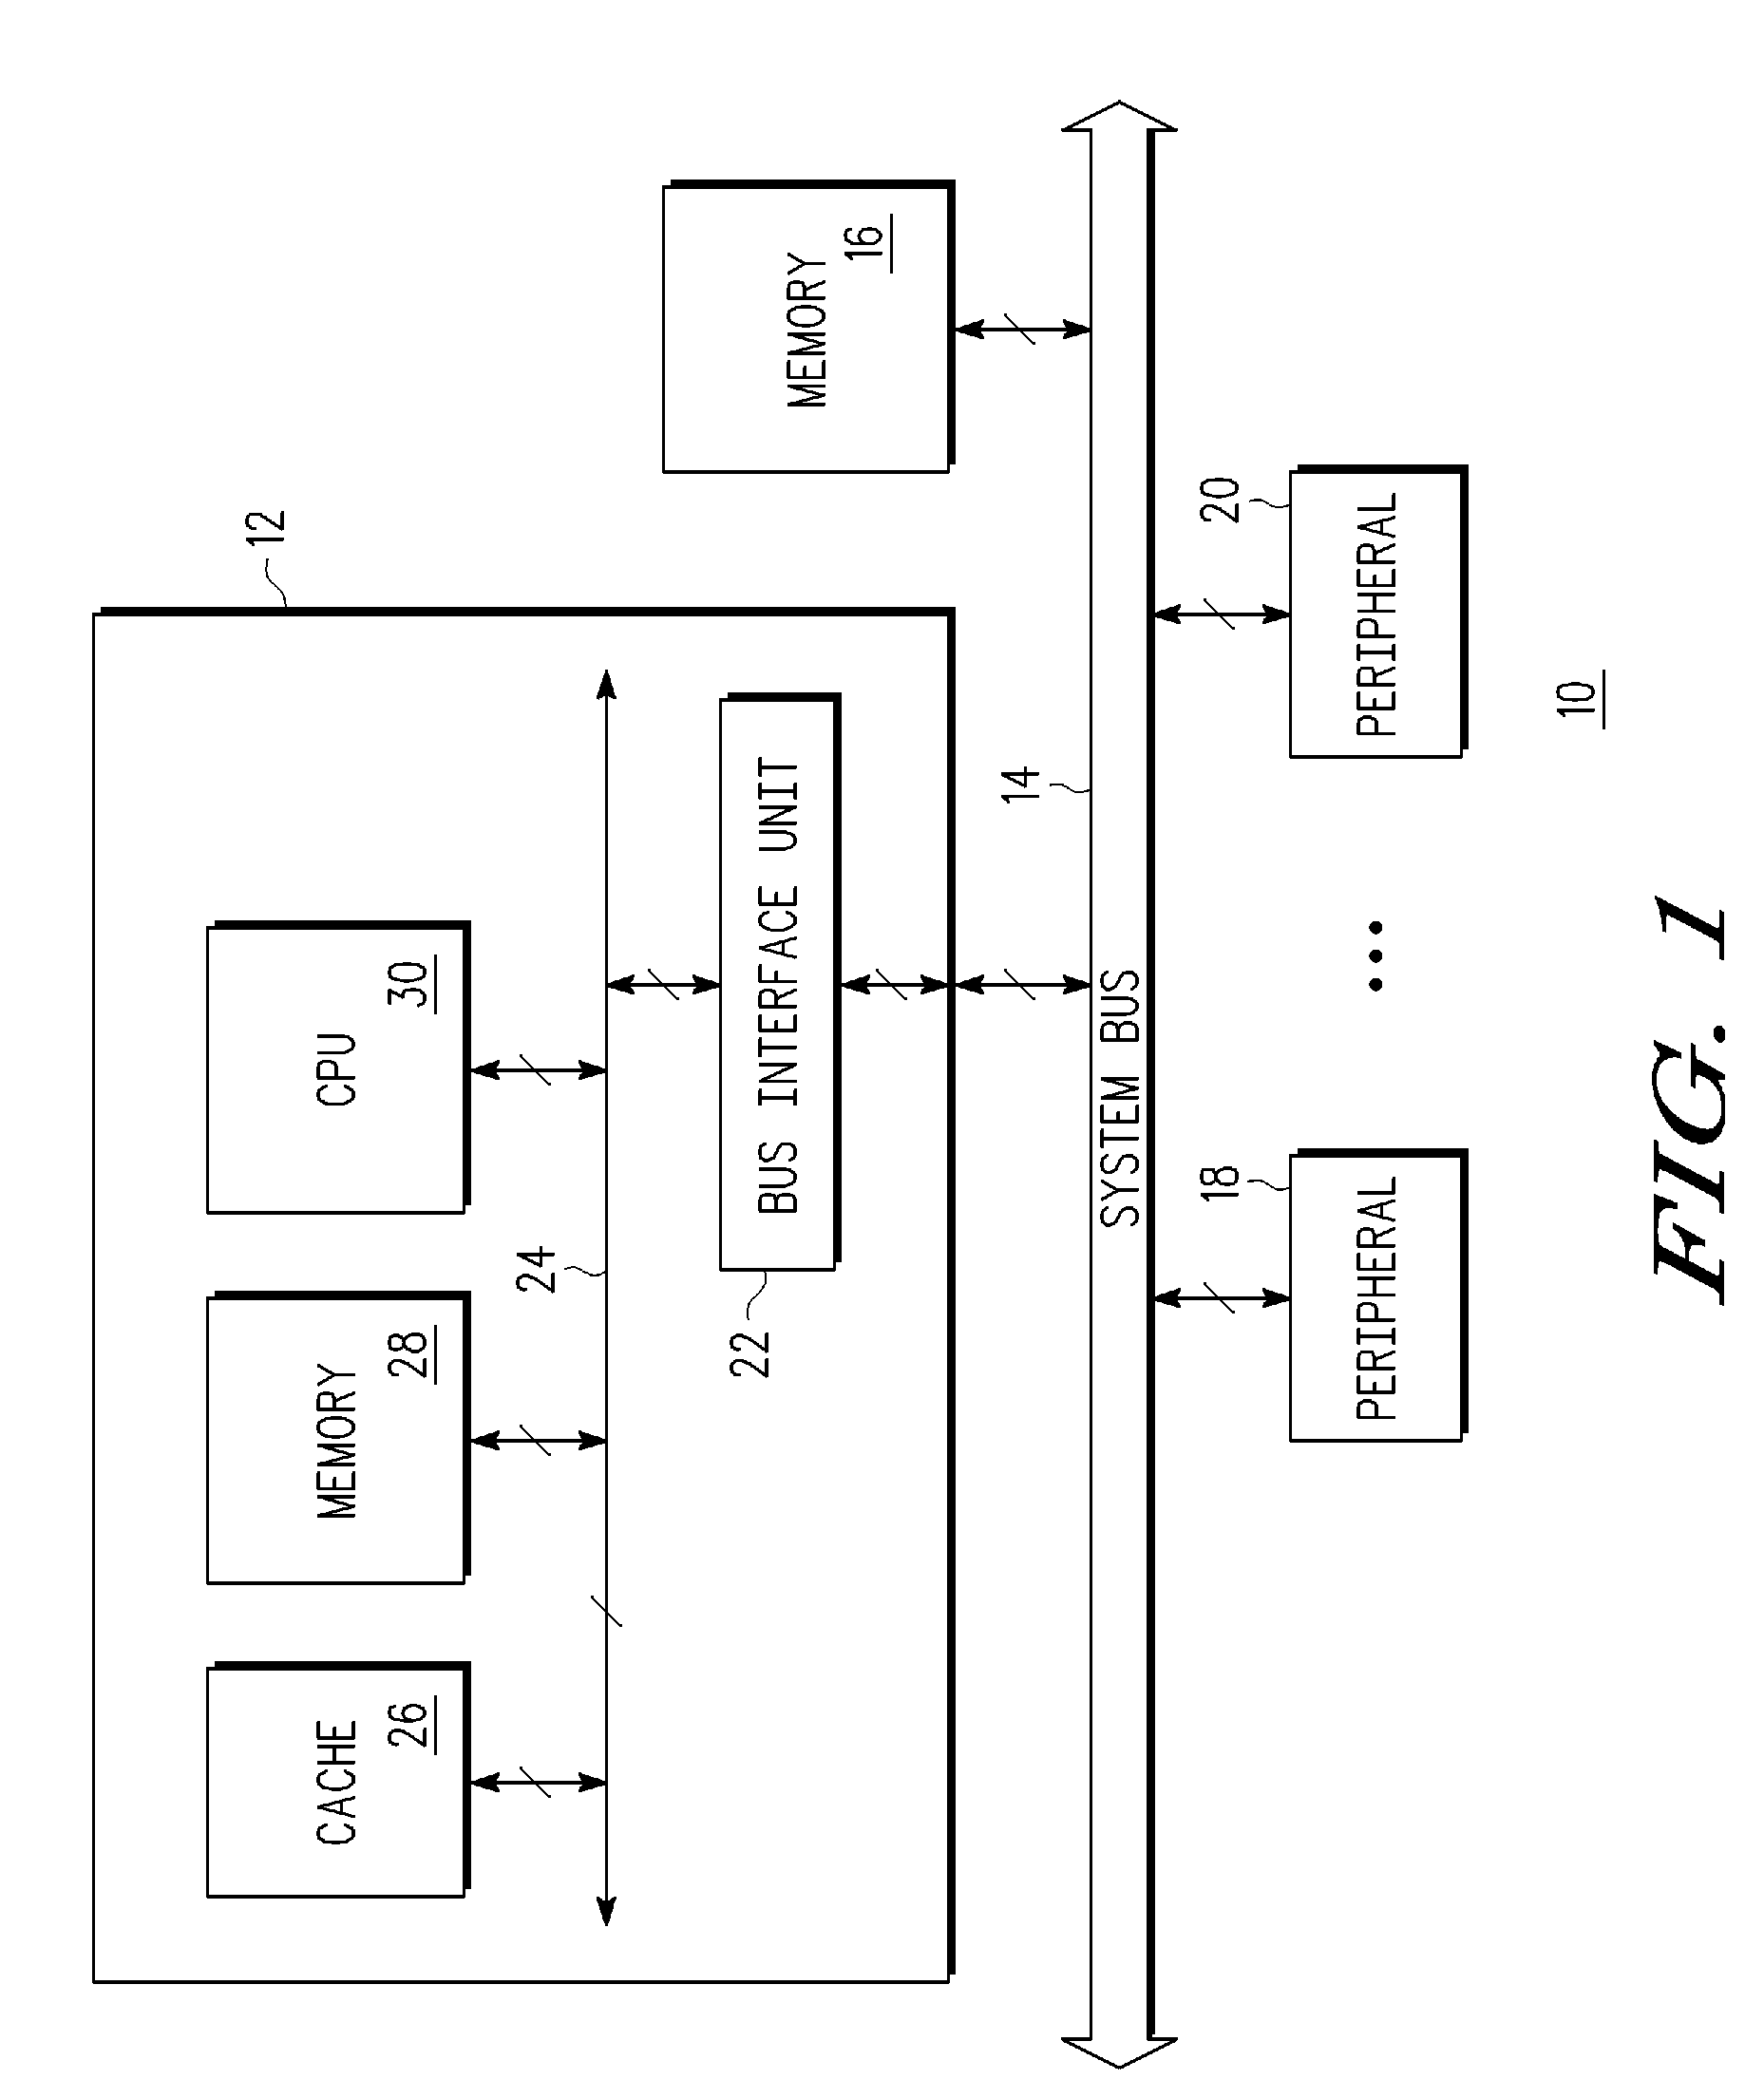 Selectively performing a single cycle write operation with ecc in a data processing system